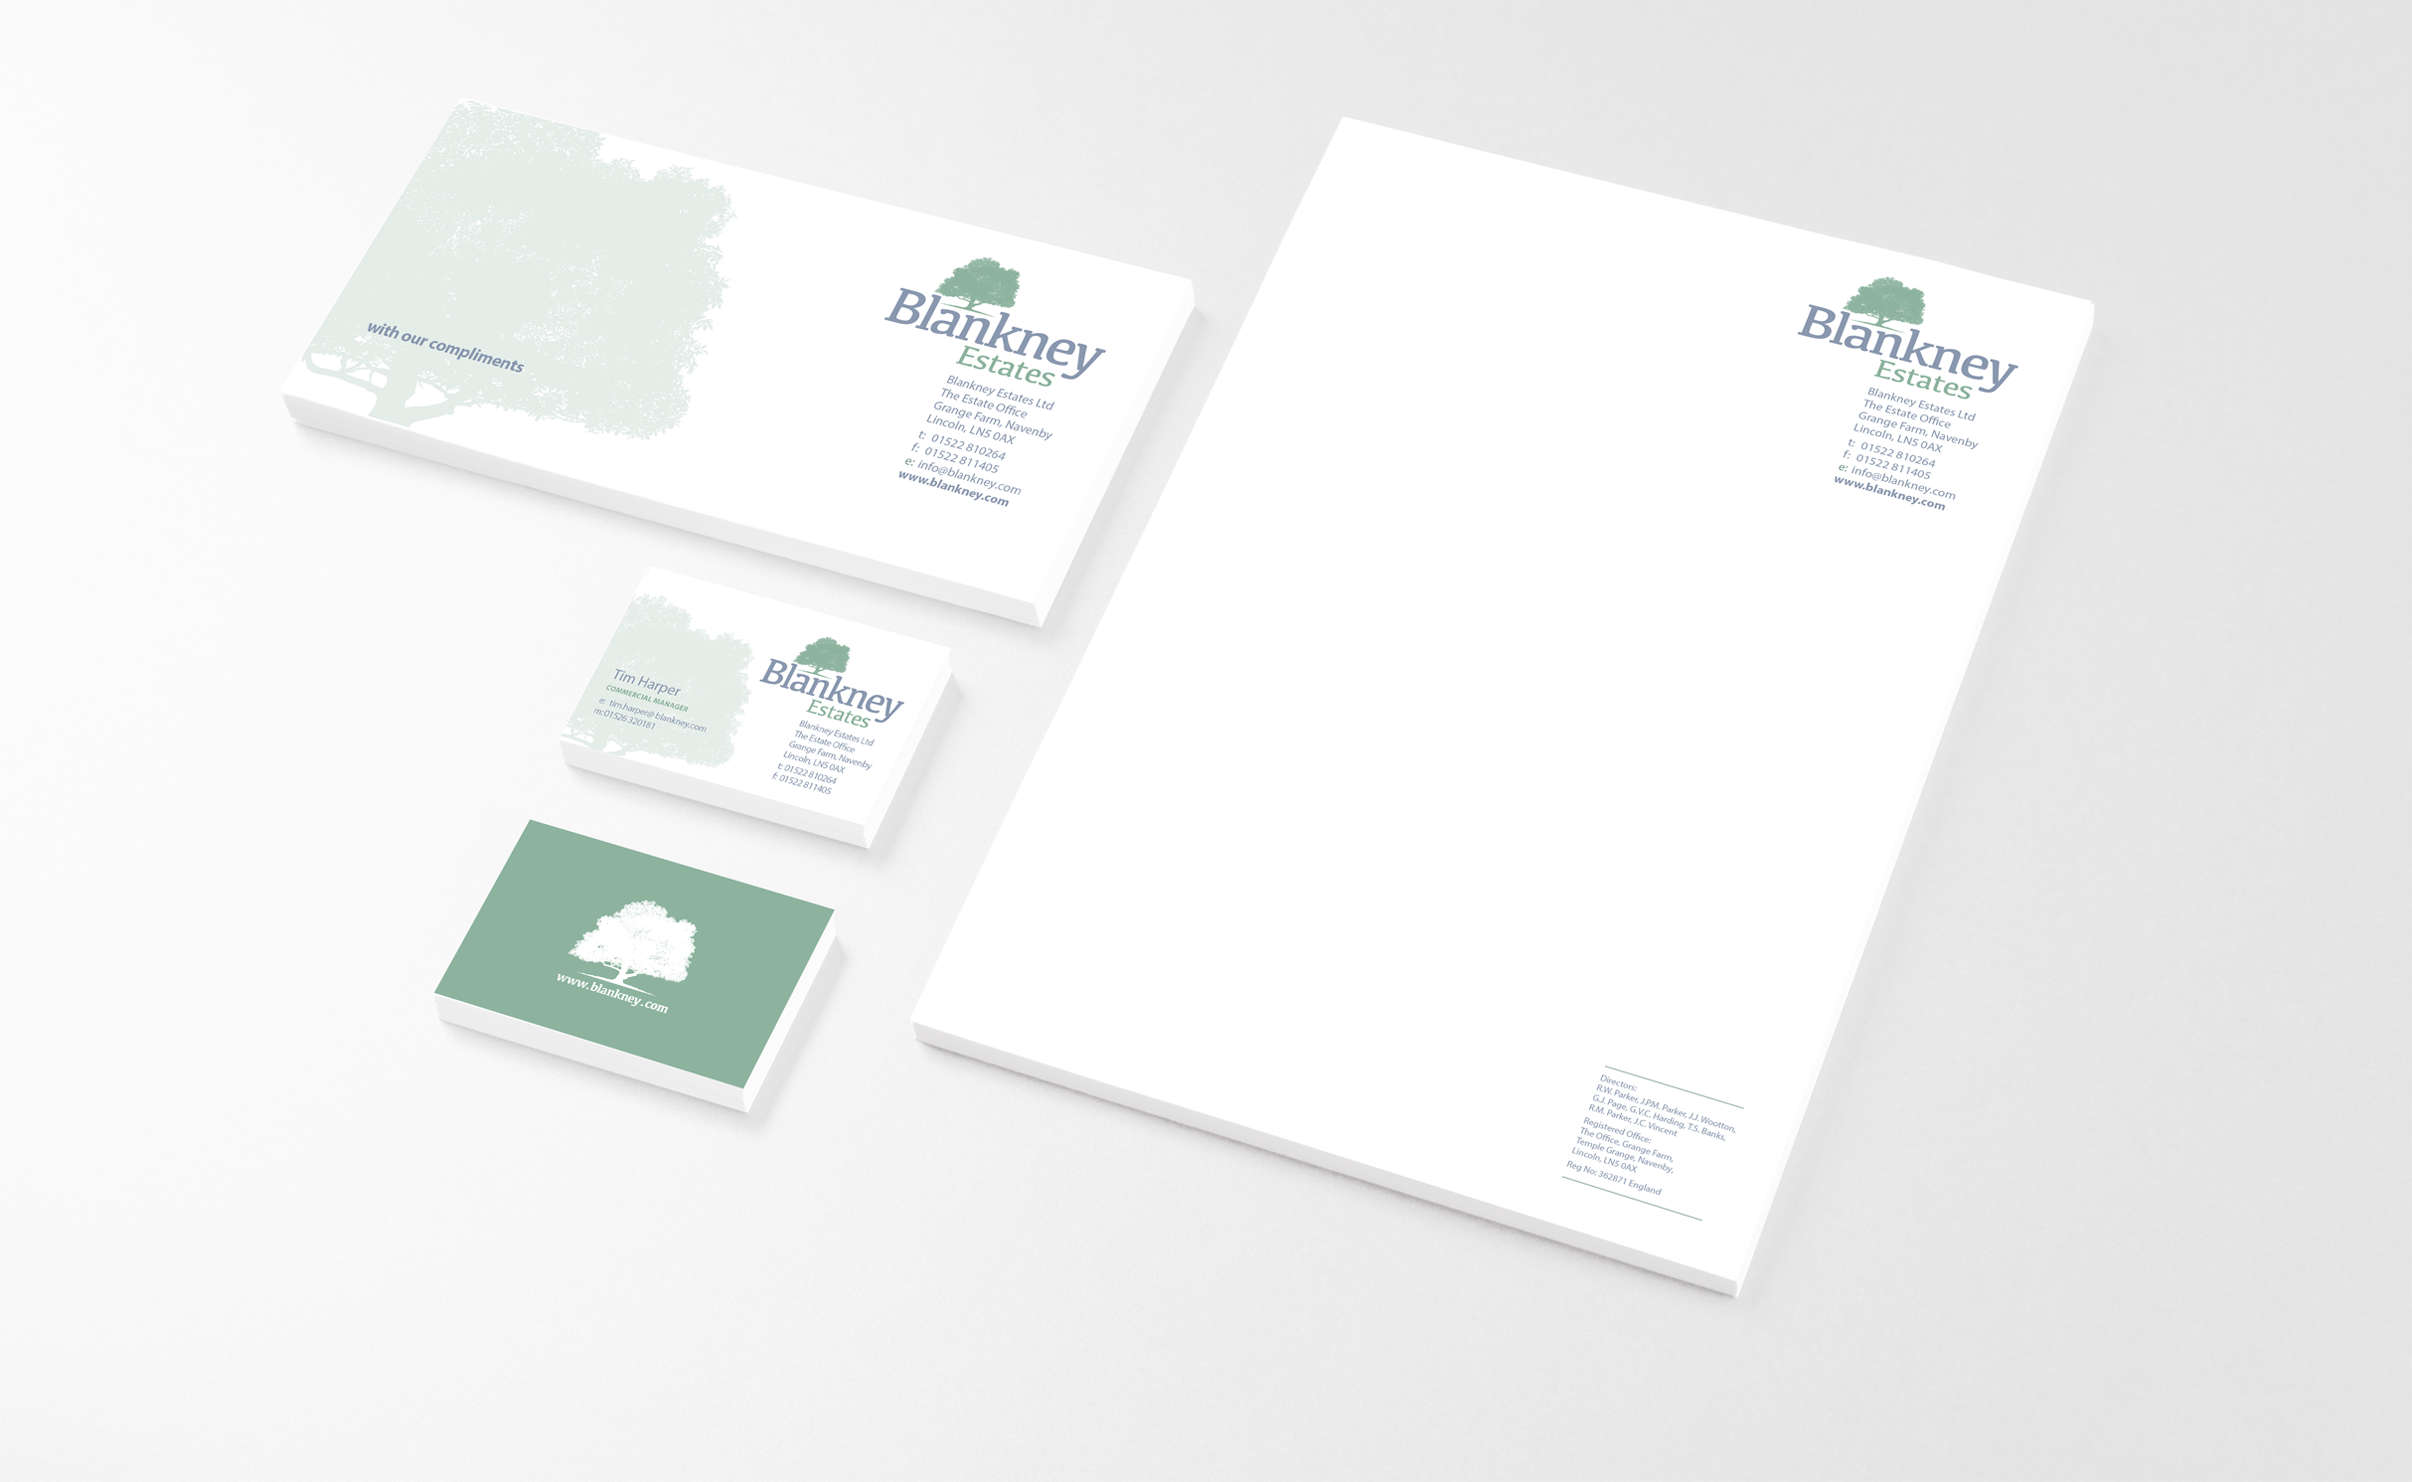 Blankney Estates literature and stationery